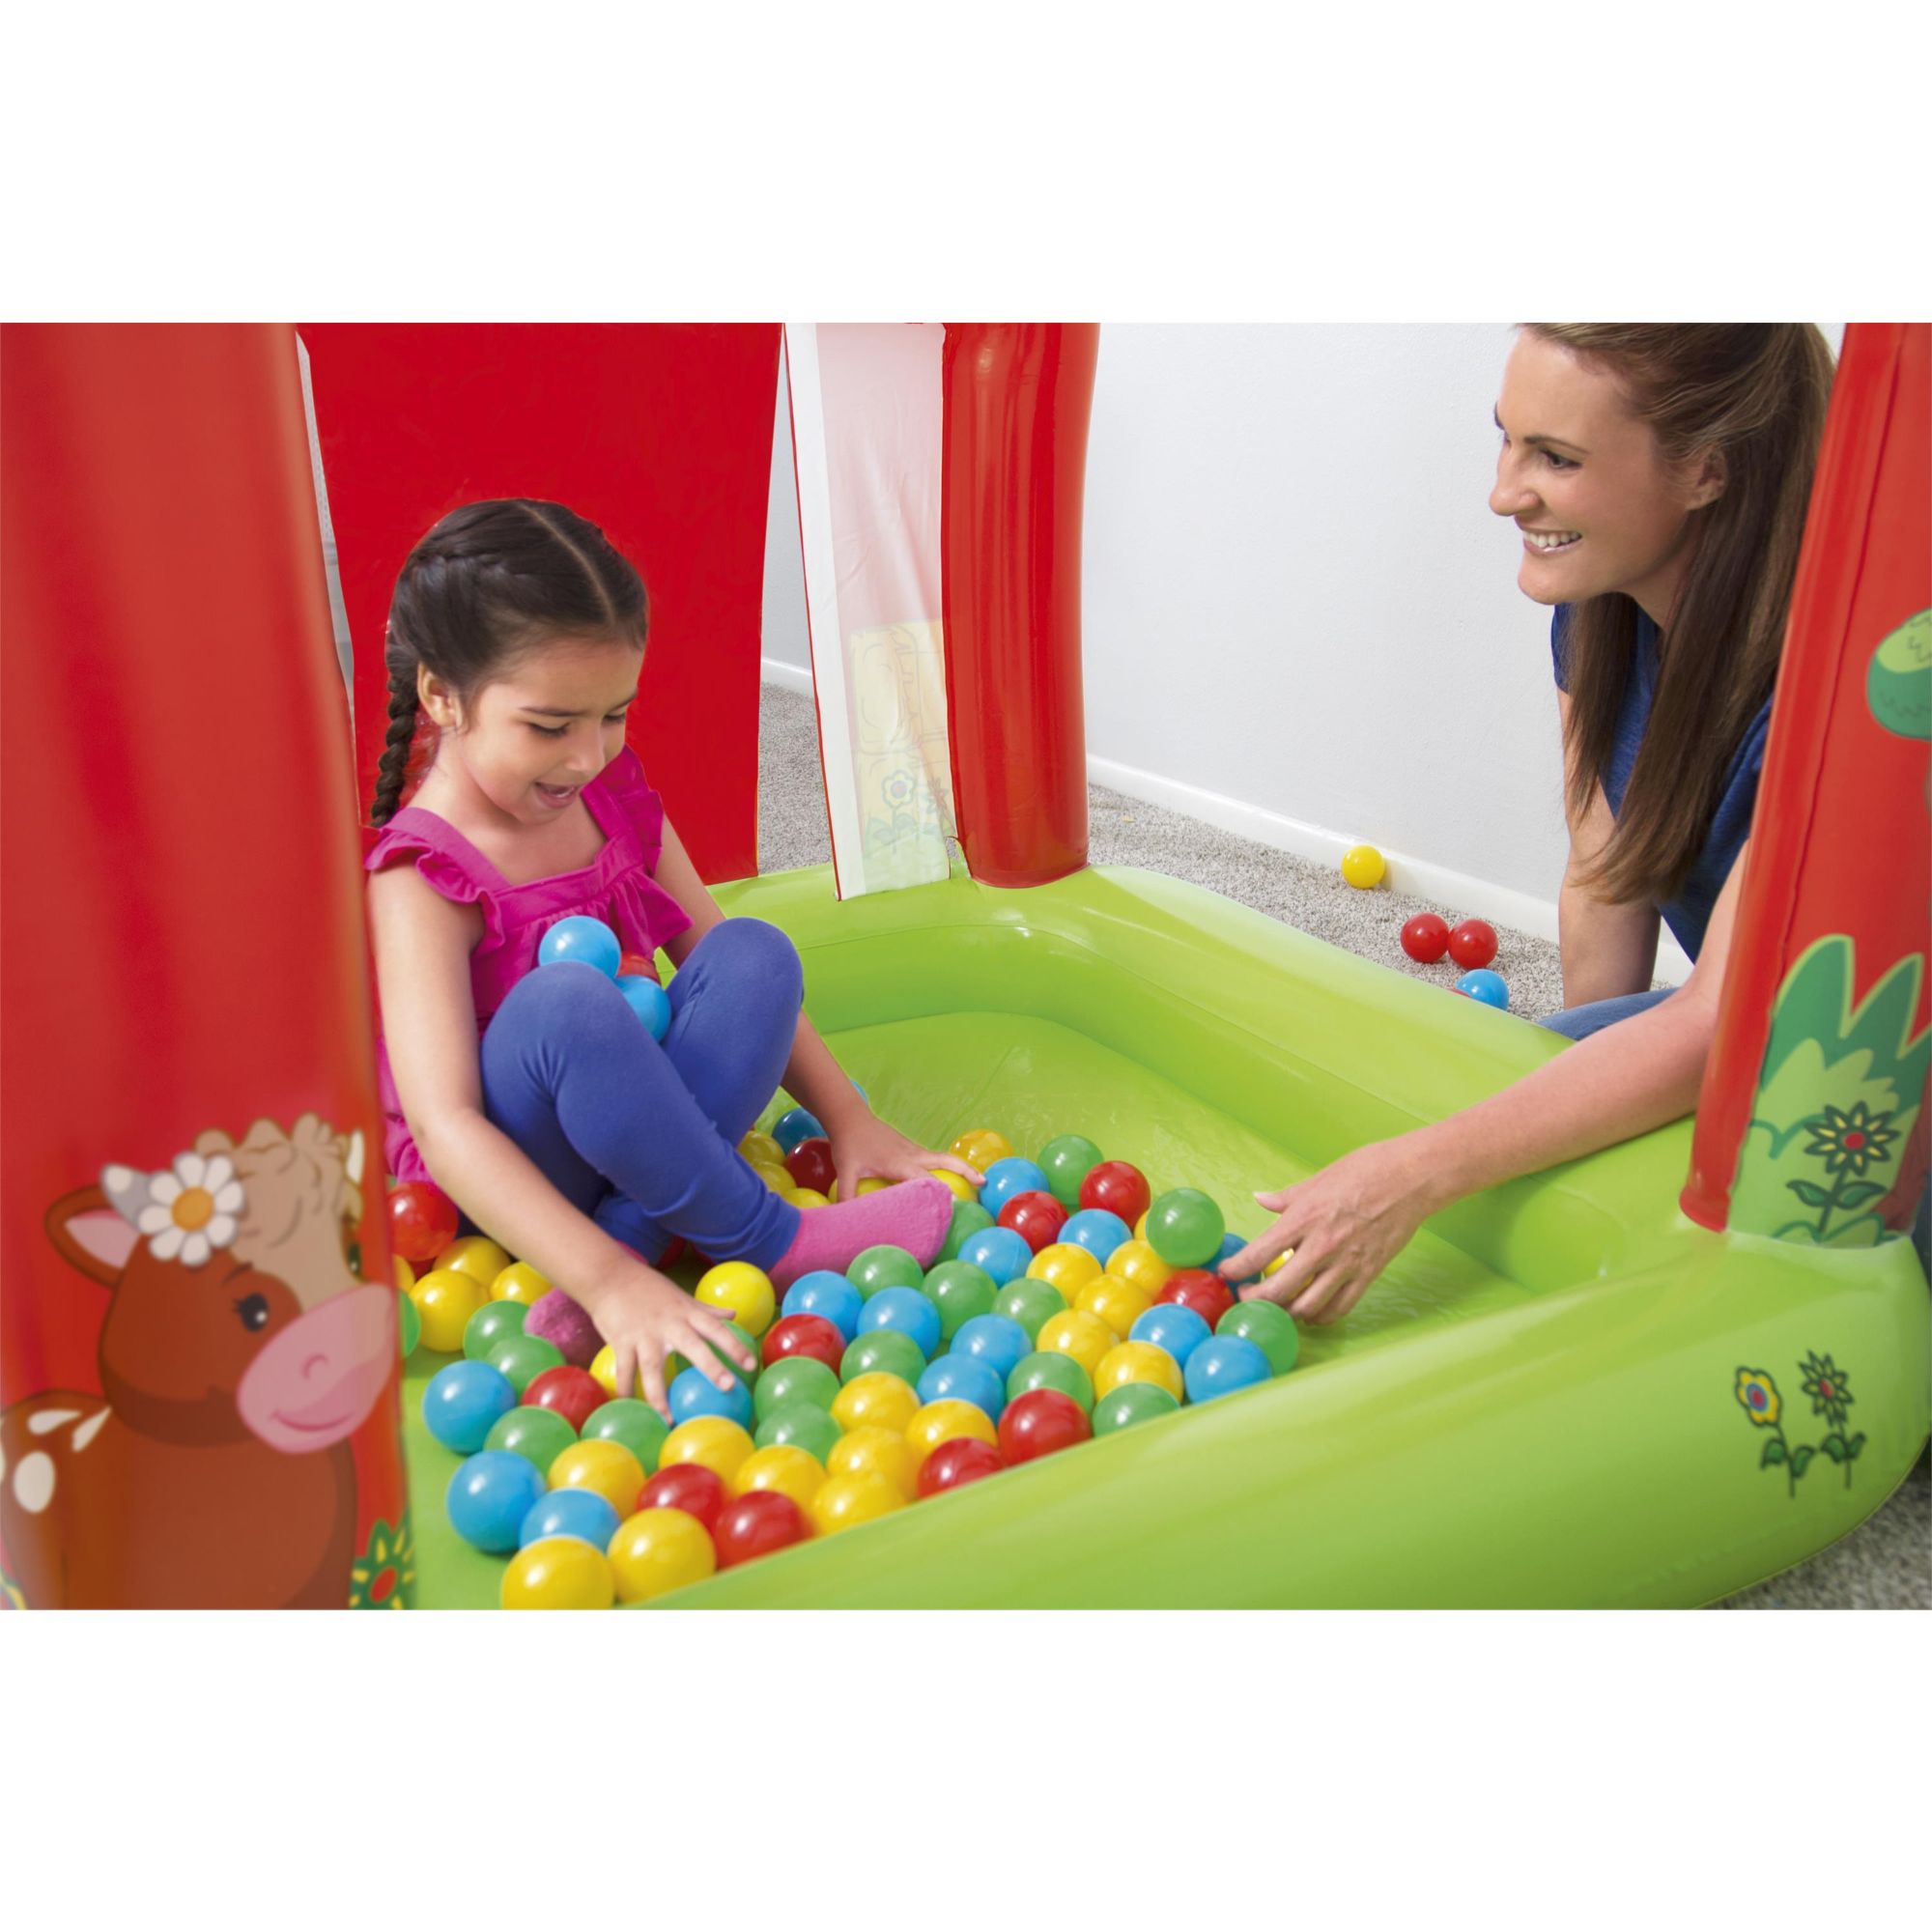 Little People™ 47 x 47 x 49 Inch Barn Ball Pit - image 5 of 6